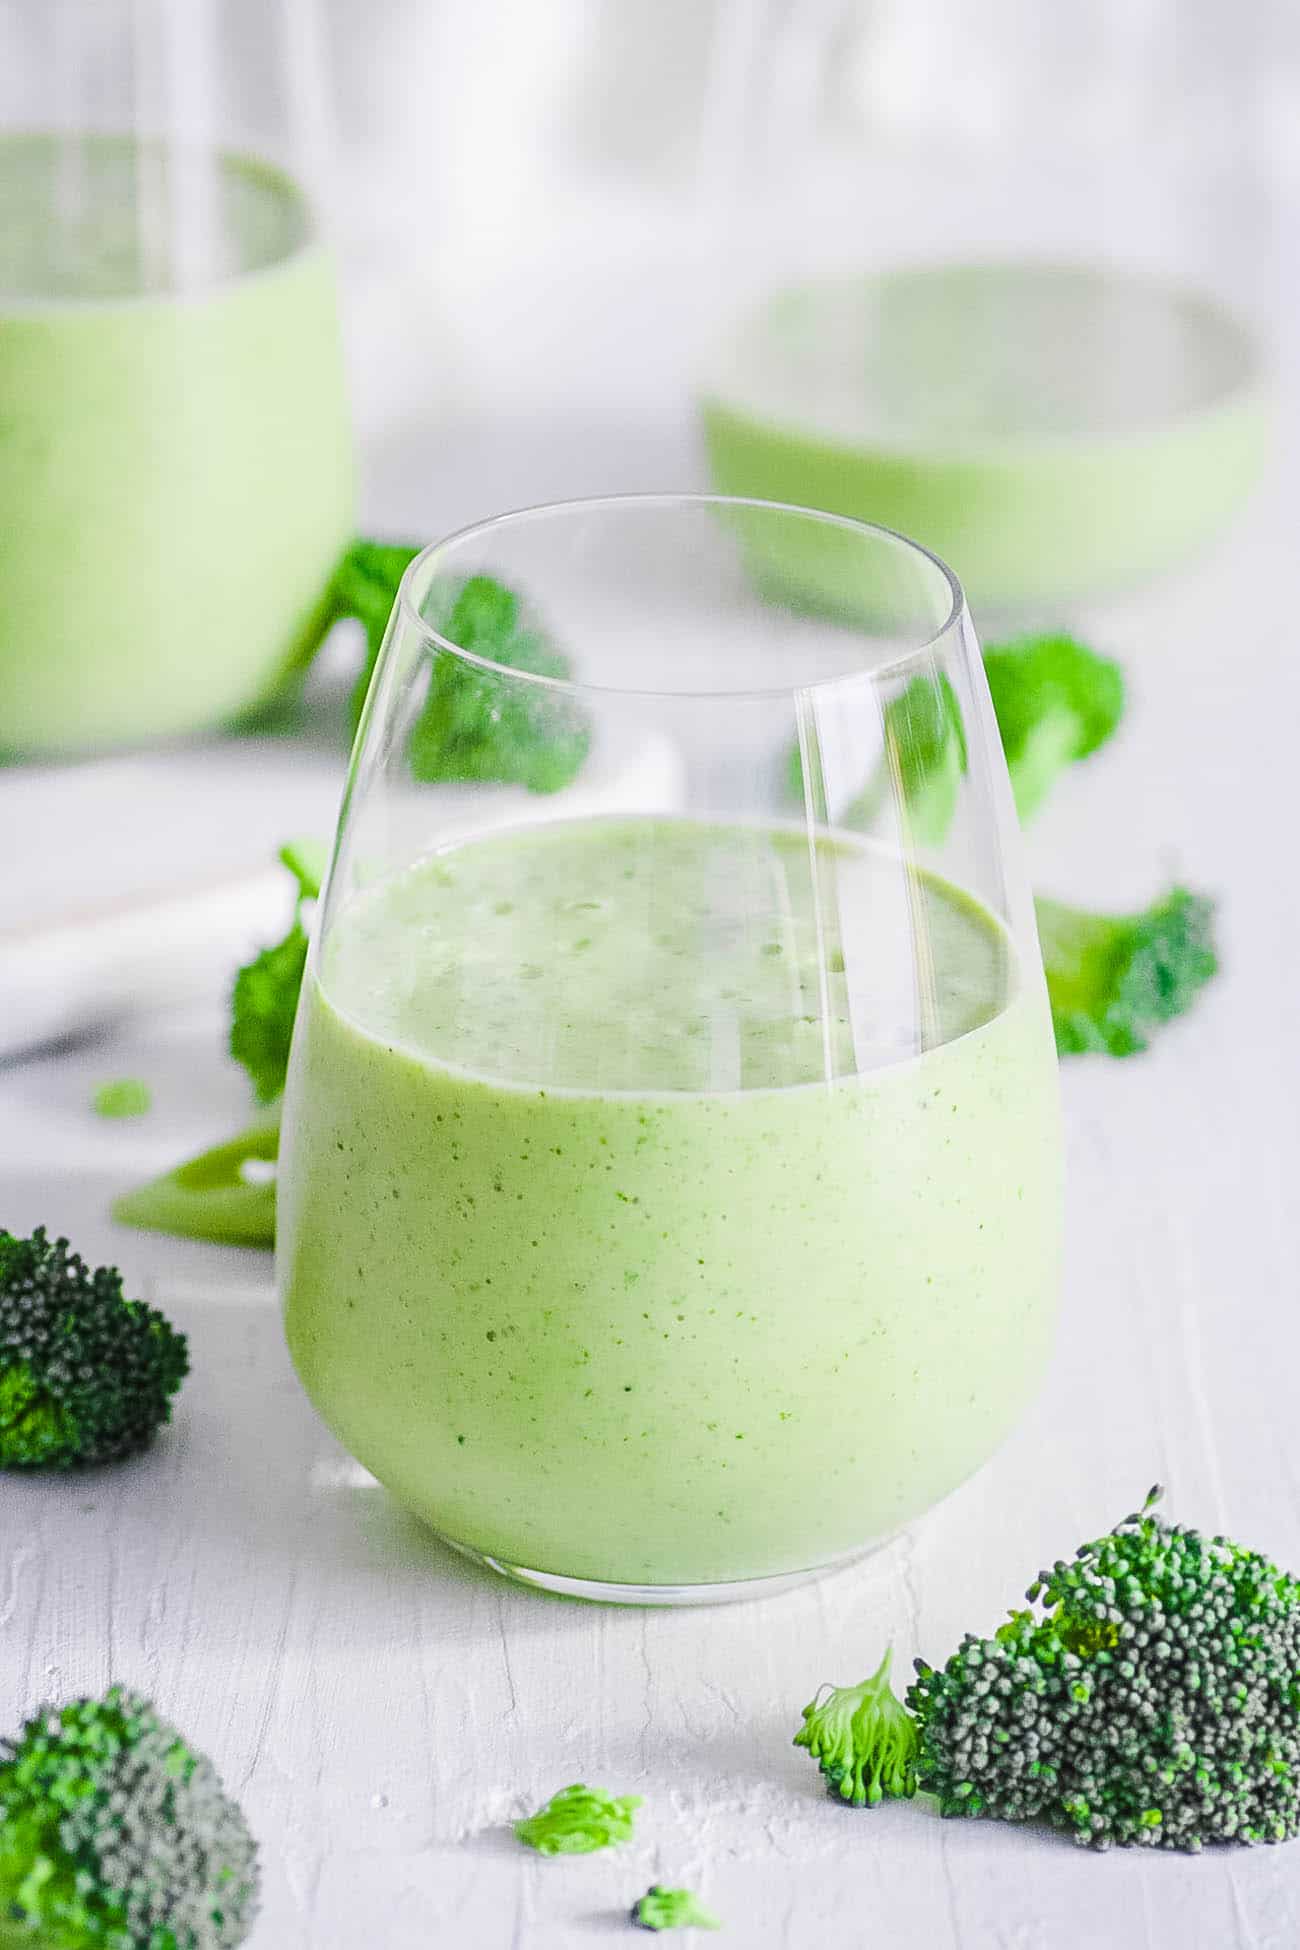 easy healthy superfood broccoli smoothie recipe with banana — Health, Kids